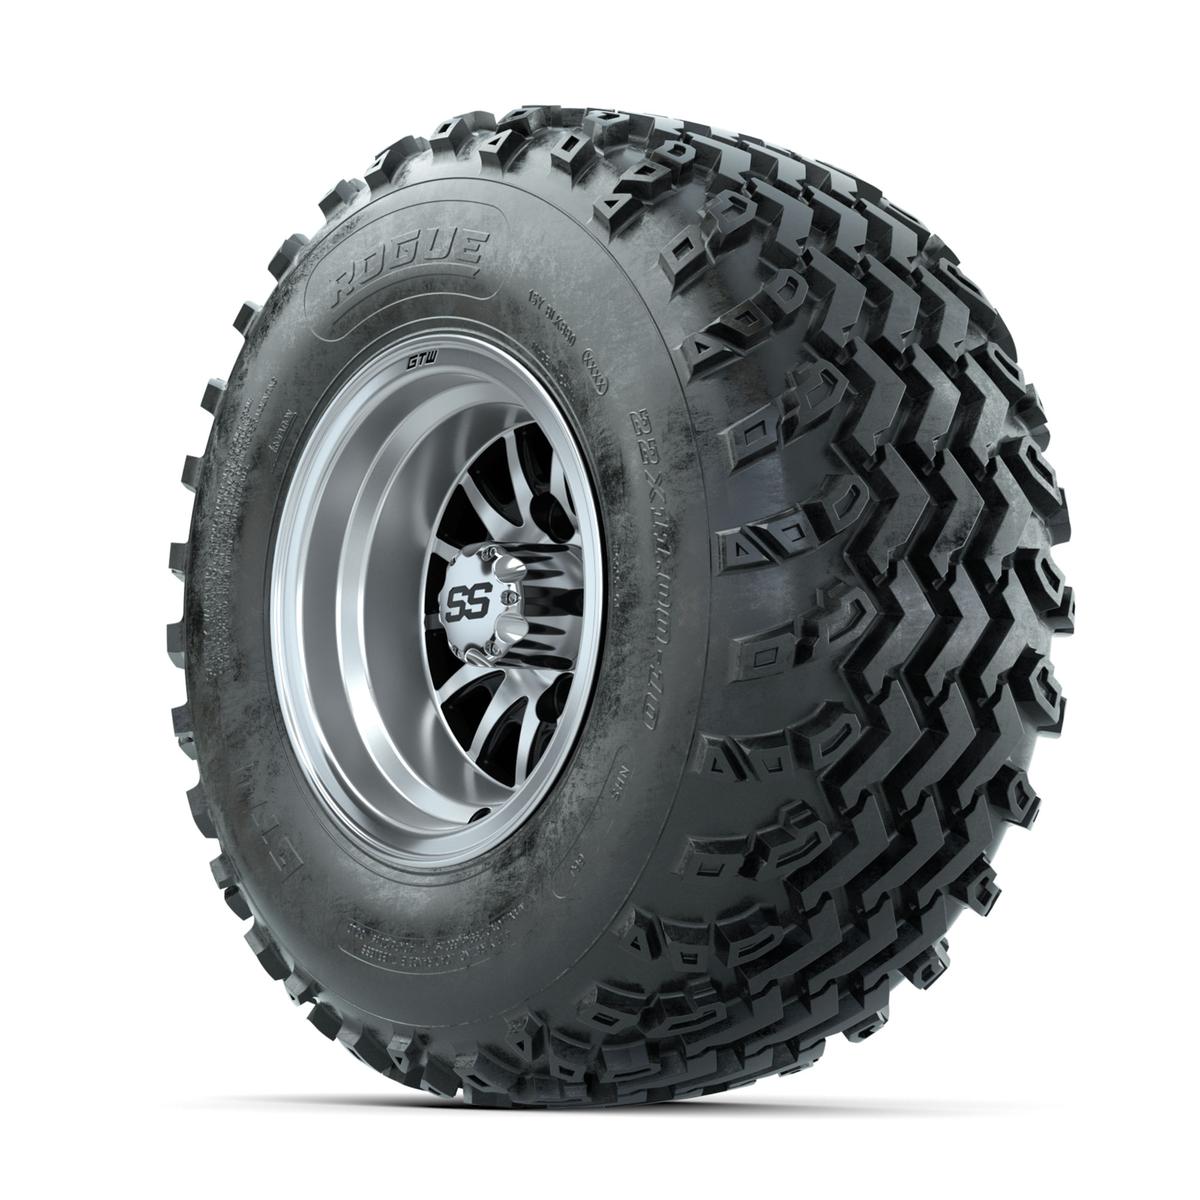 GTW Medusa Machined/Black 10 in Wheels with 22x11.00-10 Rogue All Terrain Tires – Full Set